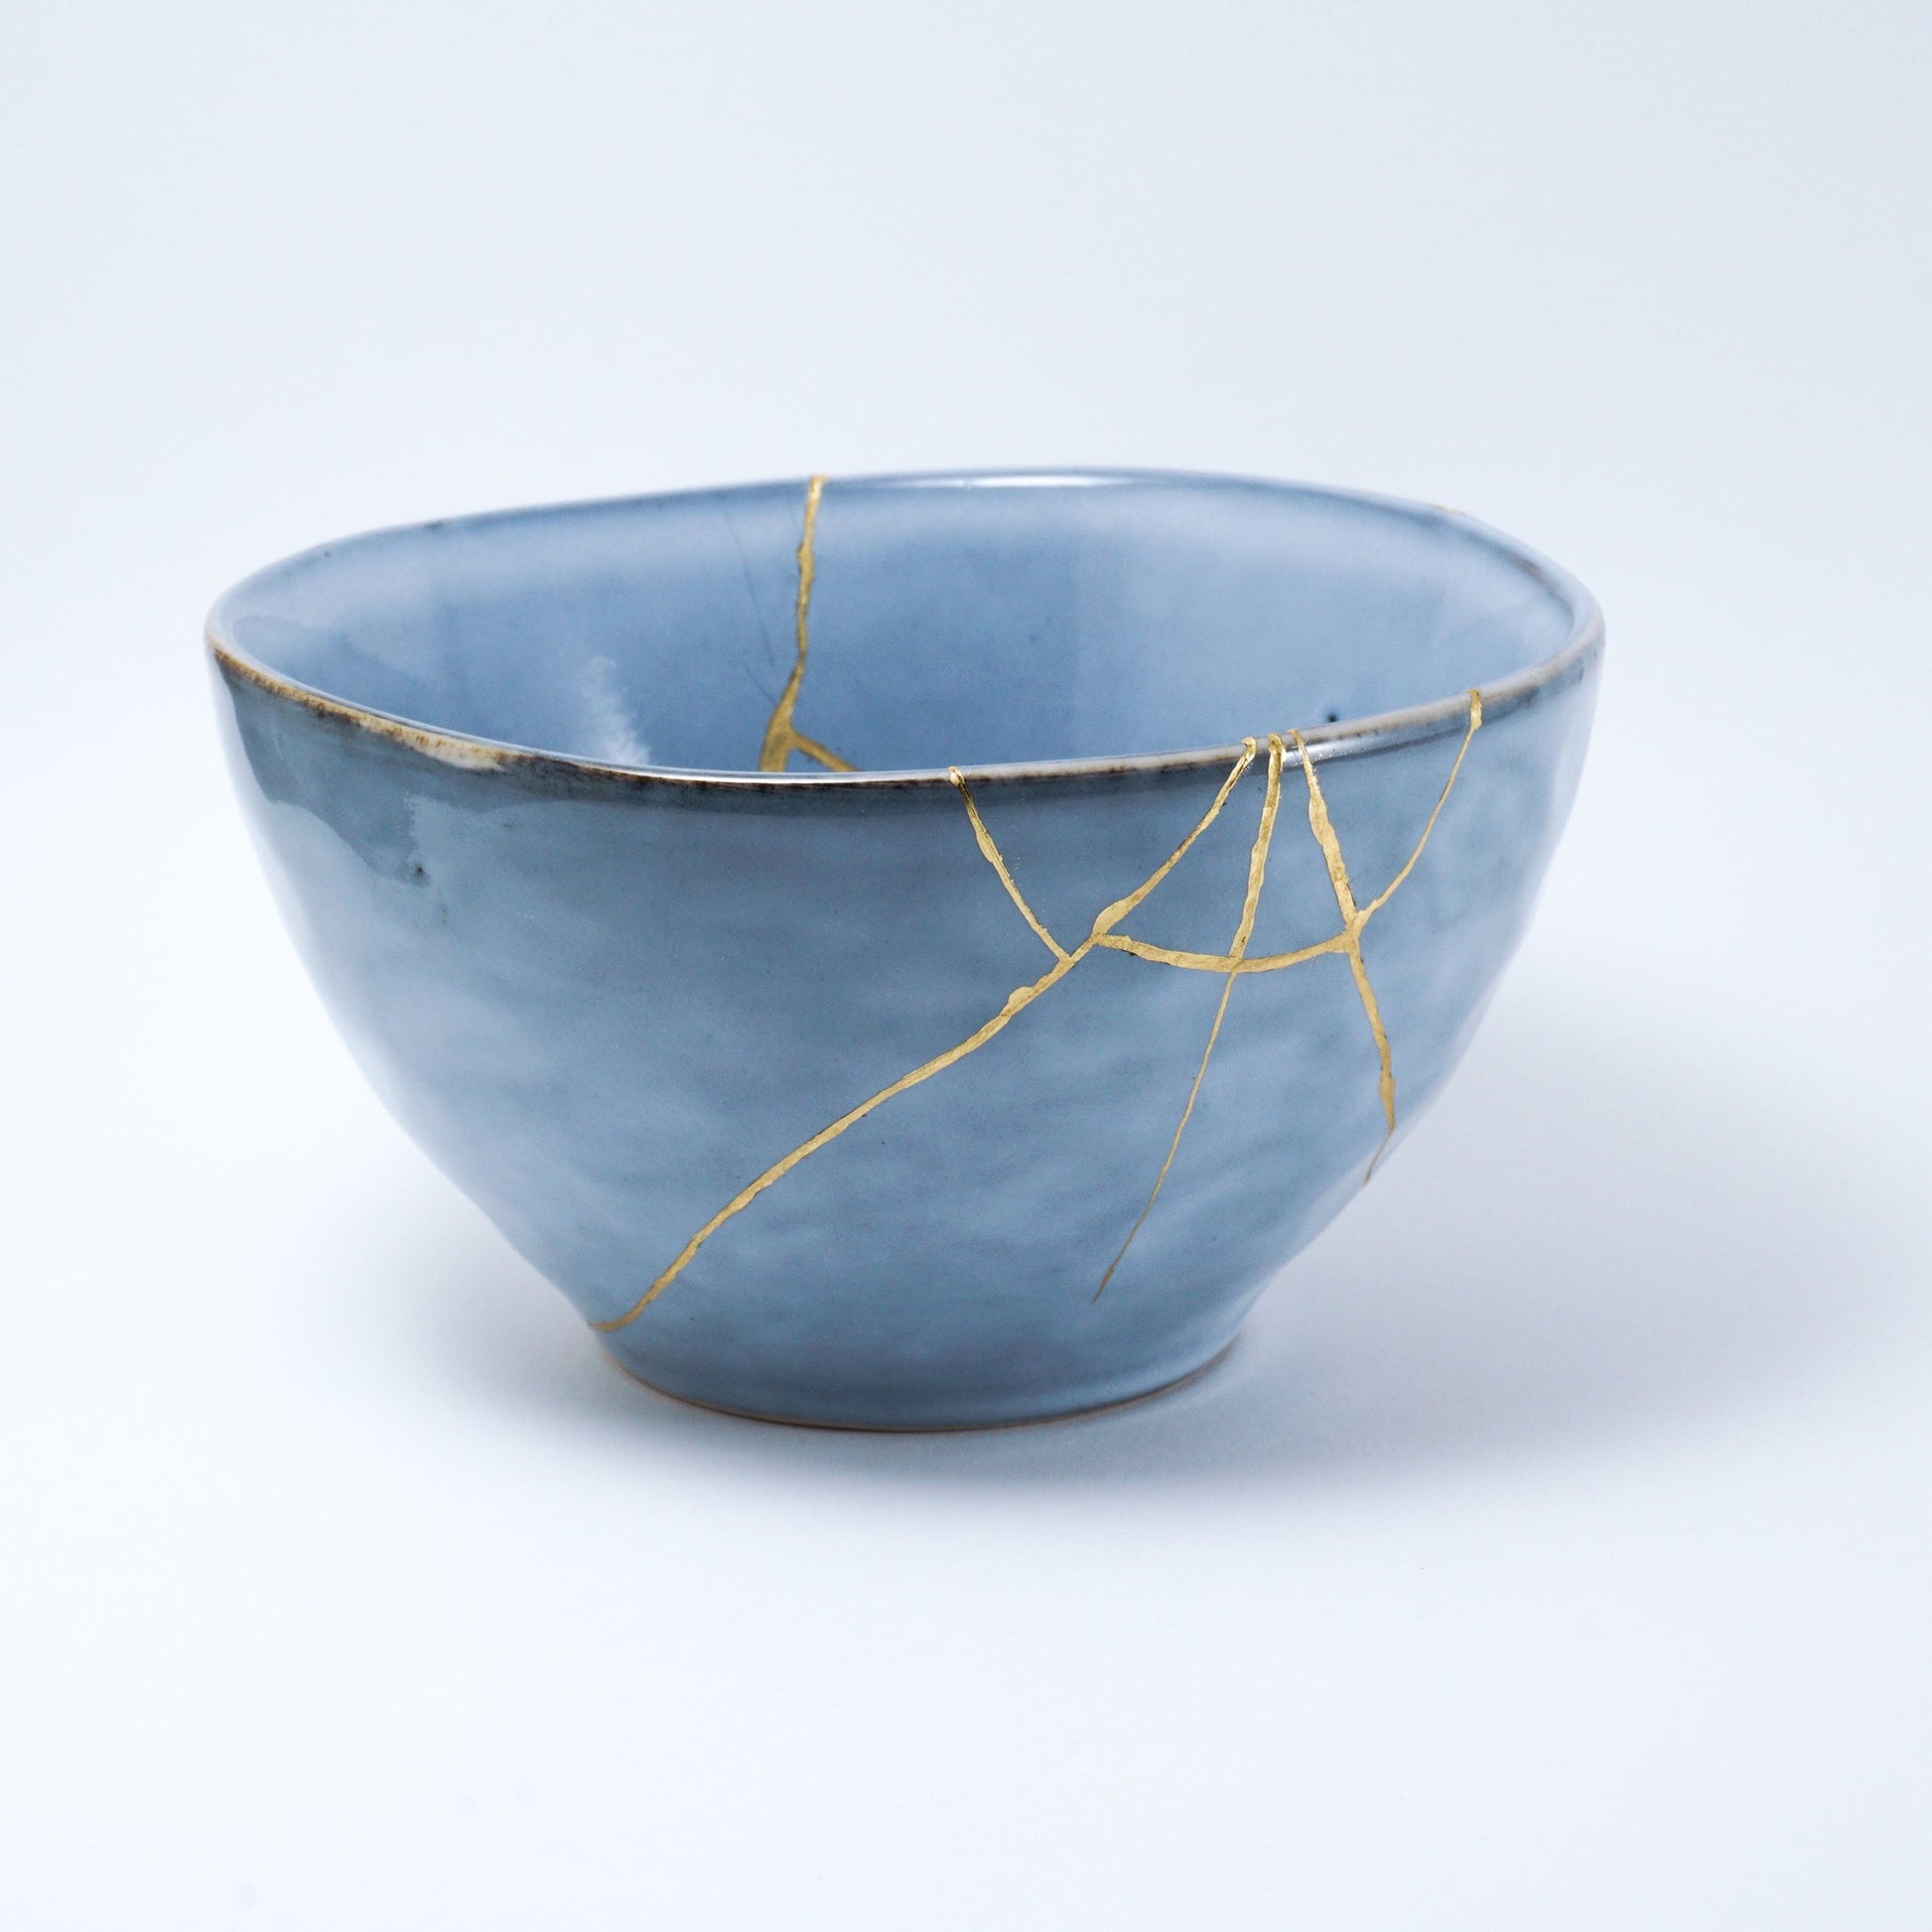 Kintsugi Pottery Photos, Images and Pictures